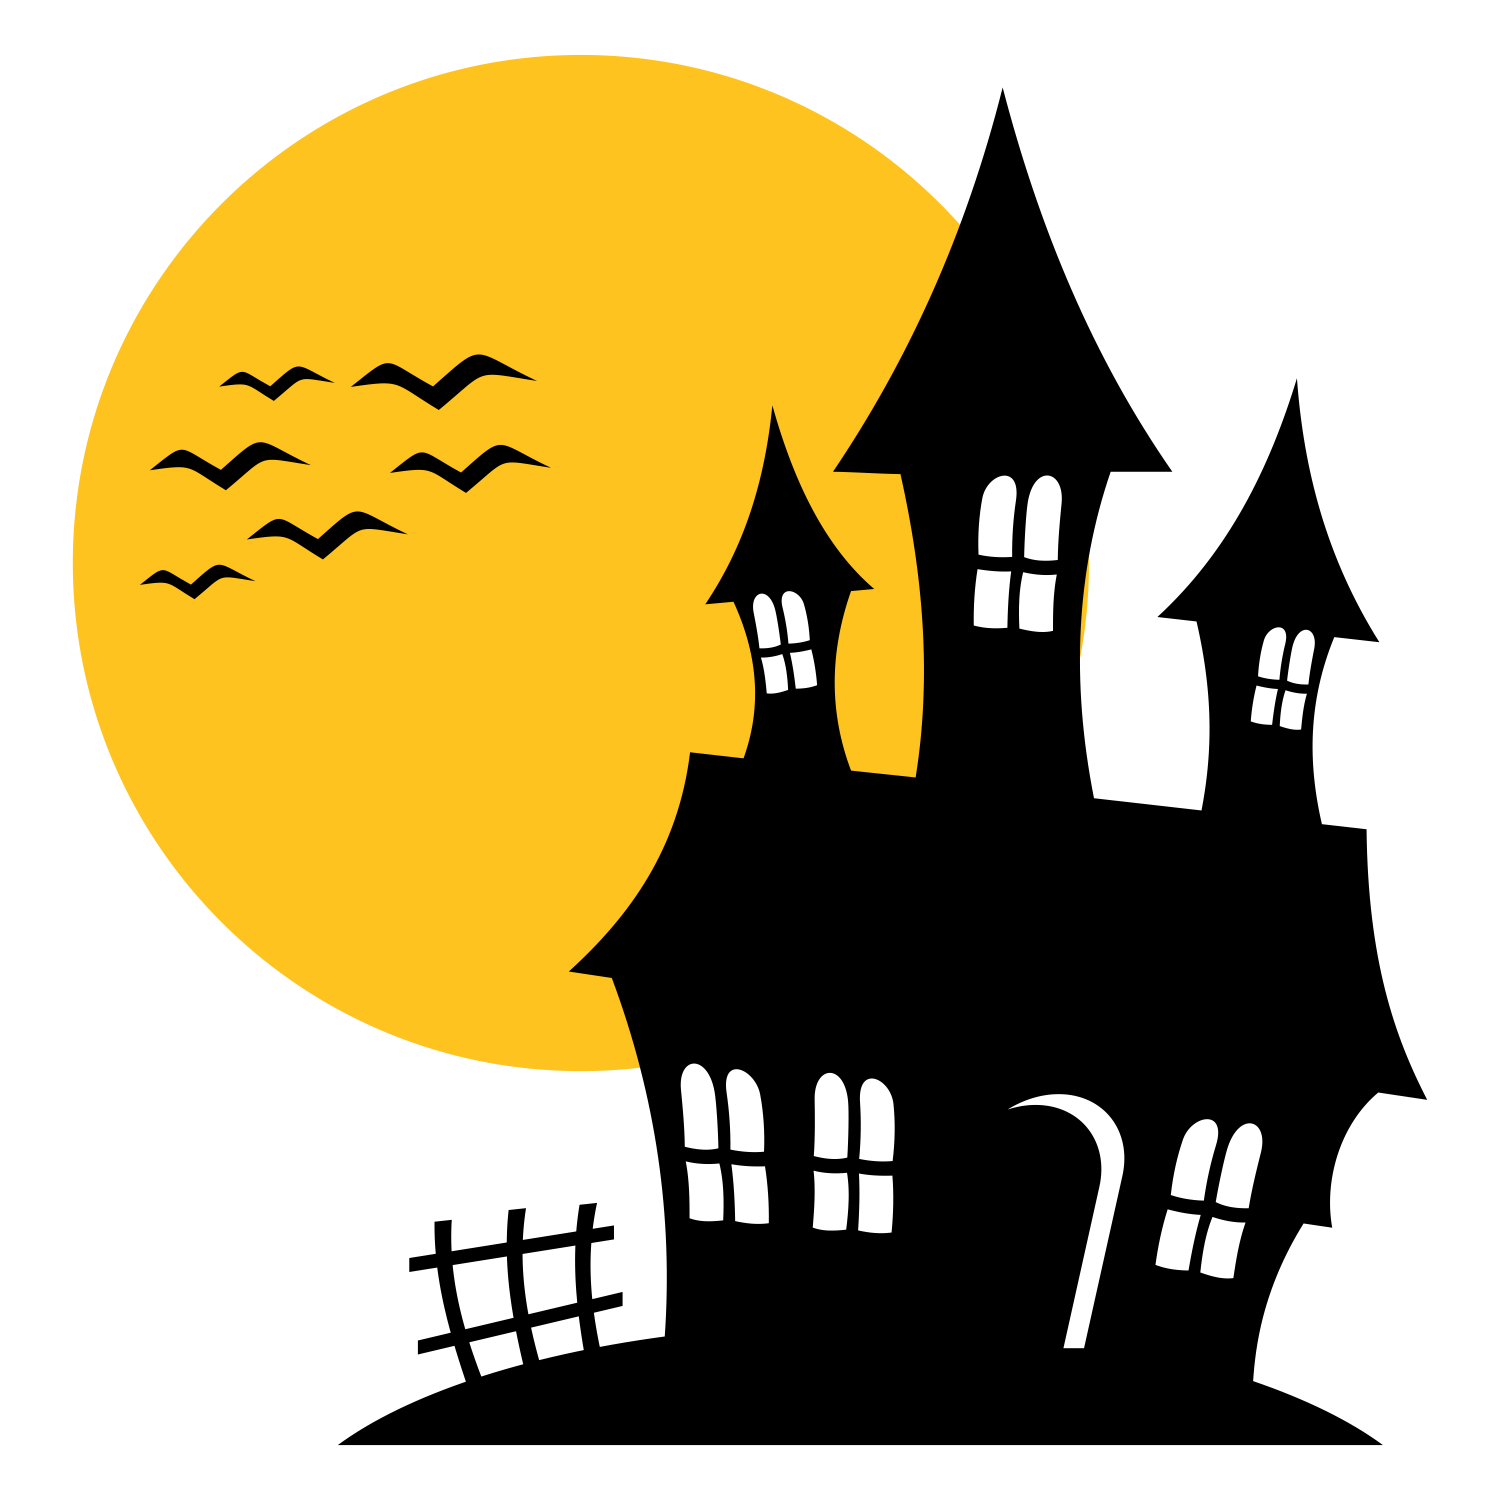 Halloween house silhouettes clipart